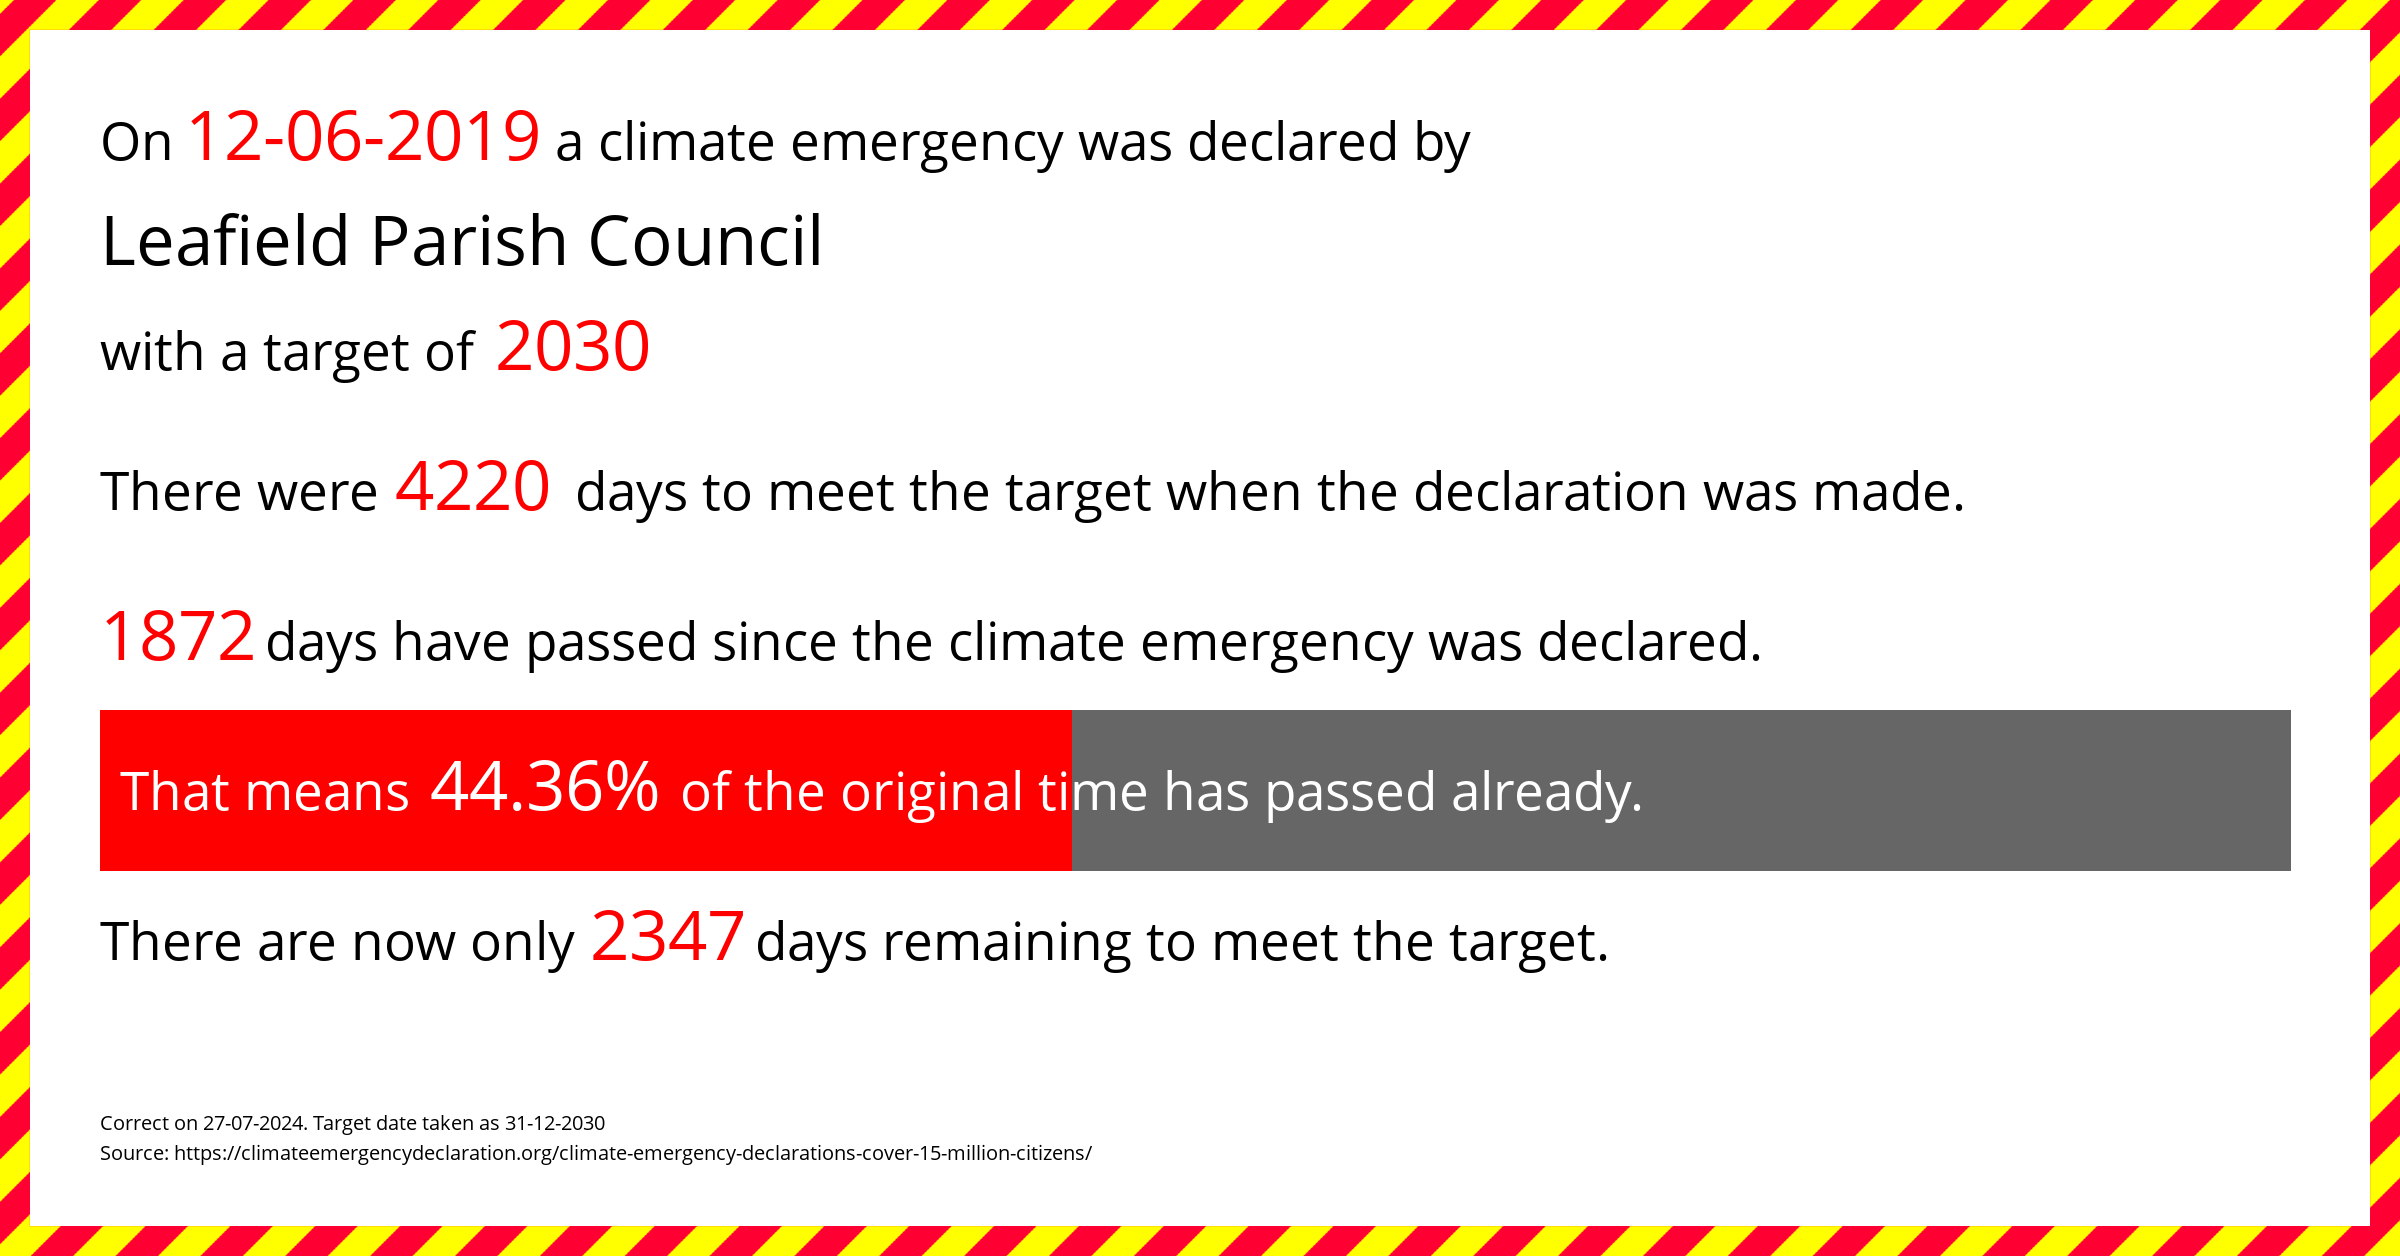 Leafield Parish Council declared a Climate emergency on Wednesday 12th June 2019, with a target of 2030.